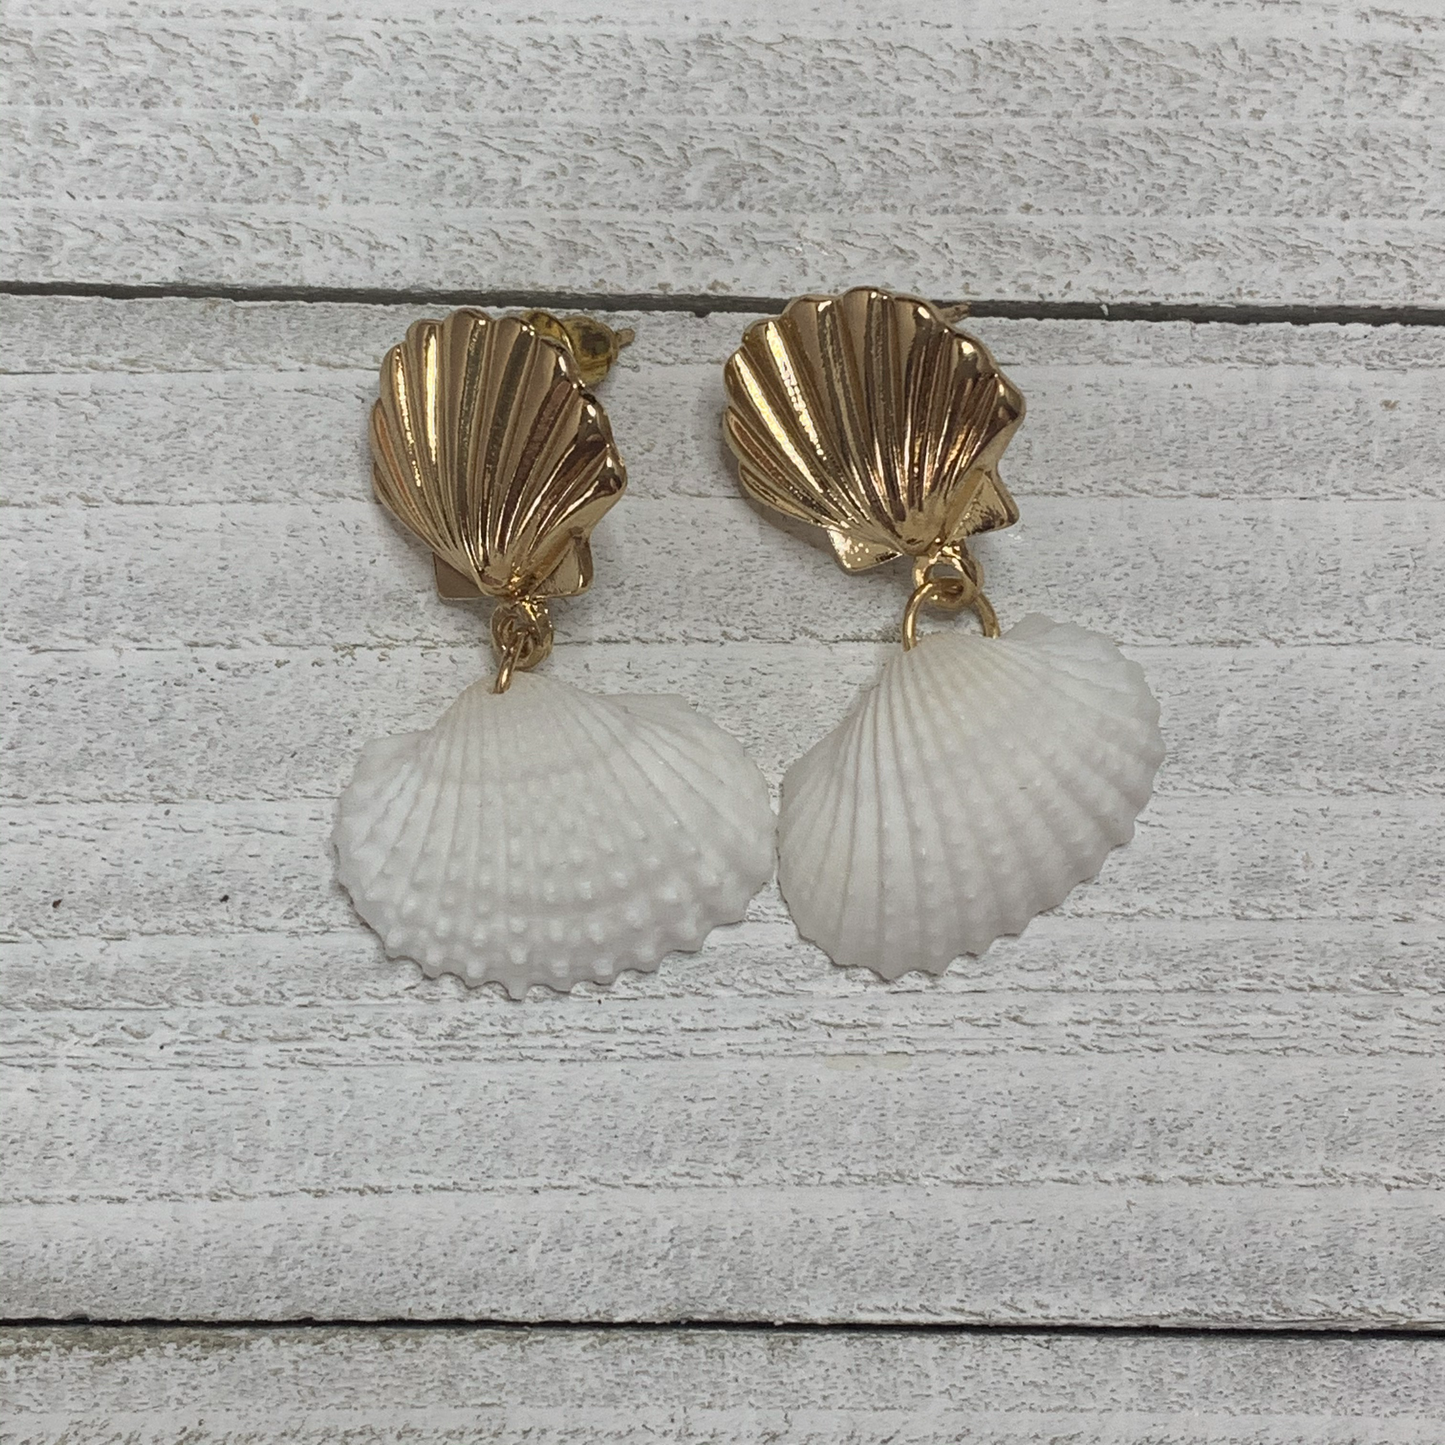 Gold plated shells with white real shells